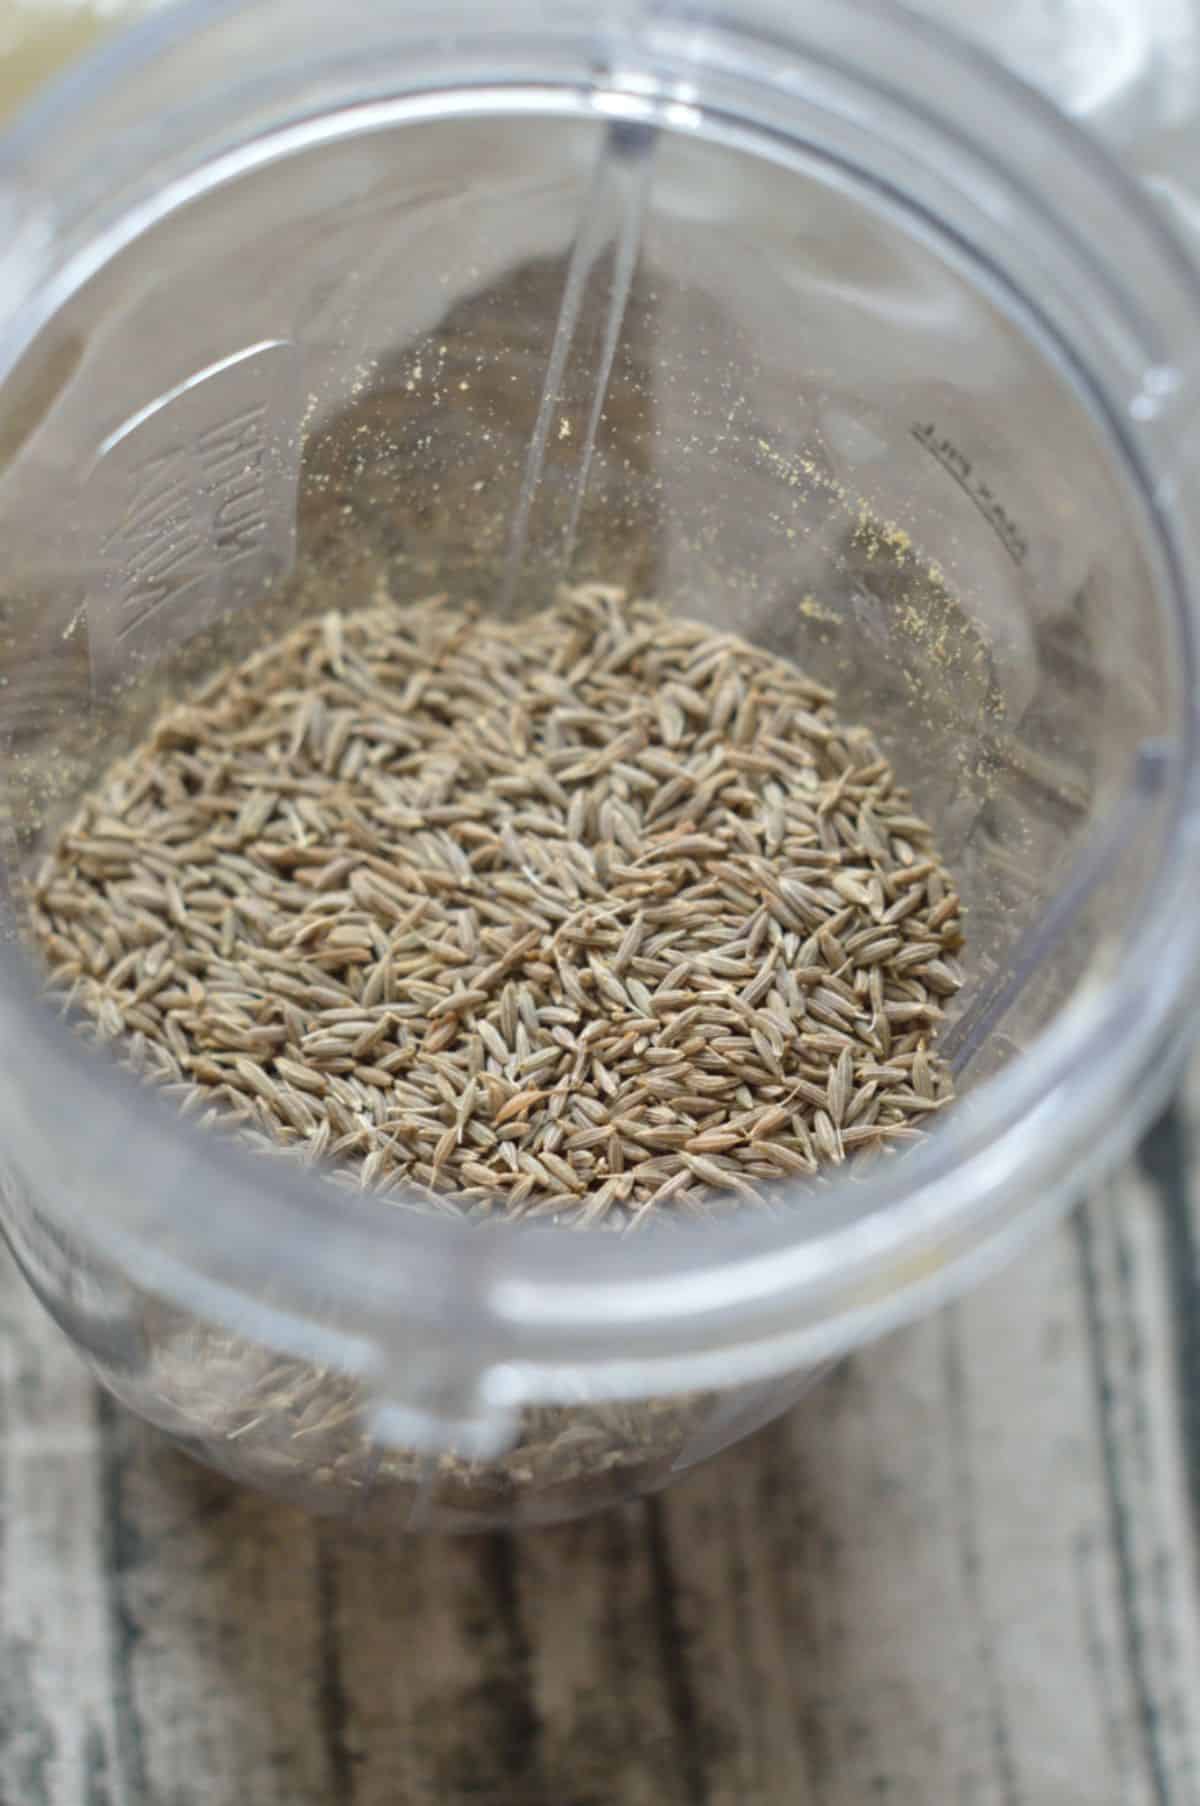 Roasted cumin seeds in a blender.